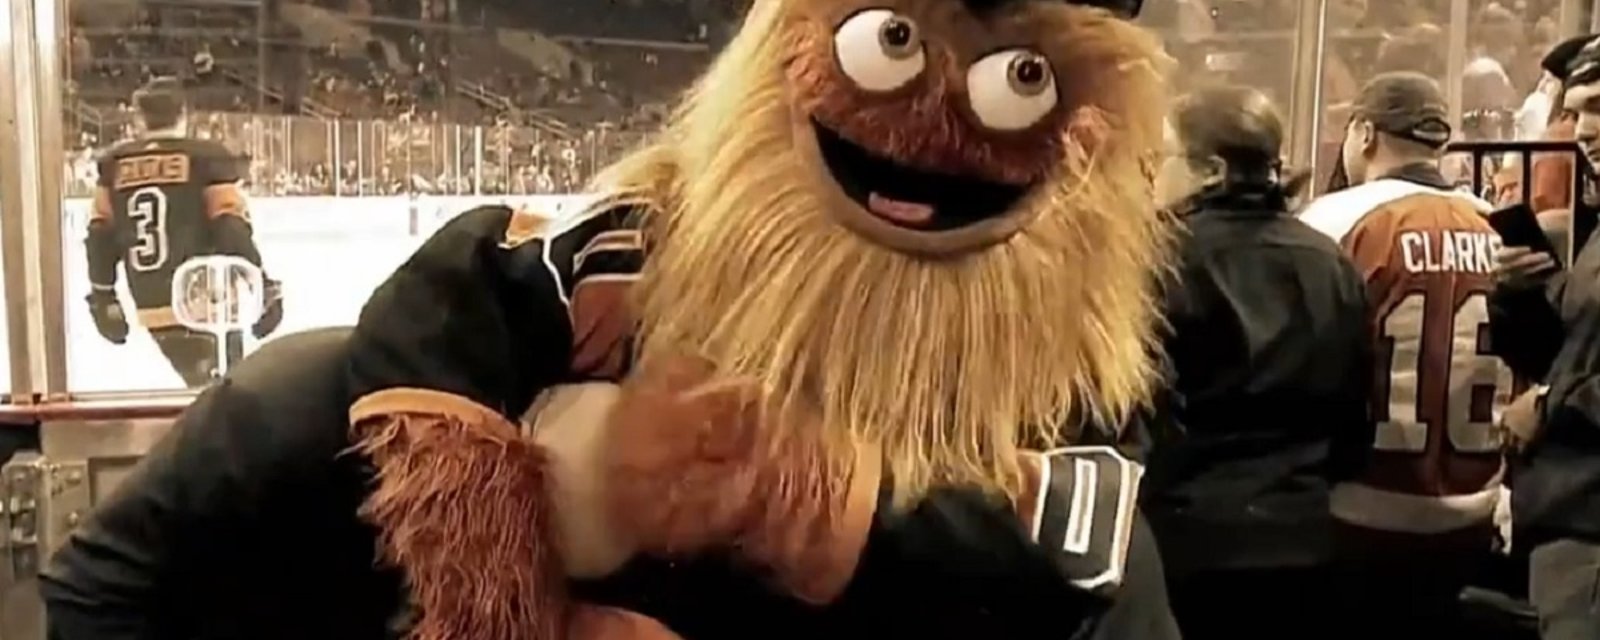 Gritty steals the show in new HNIC intro.